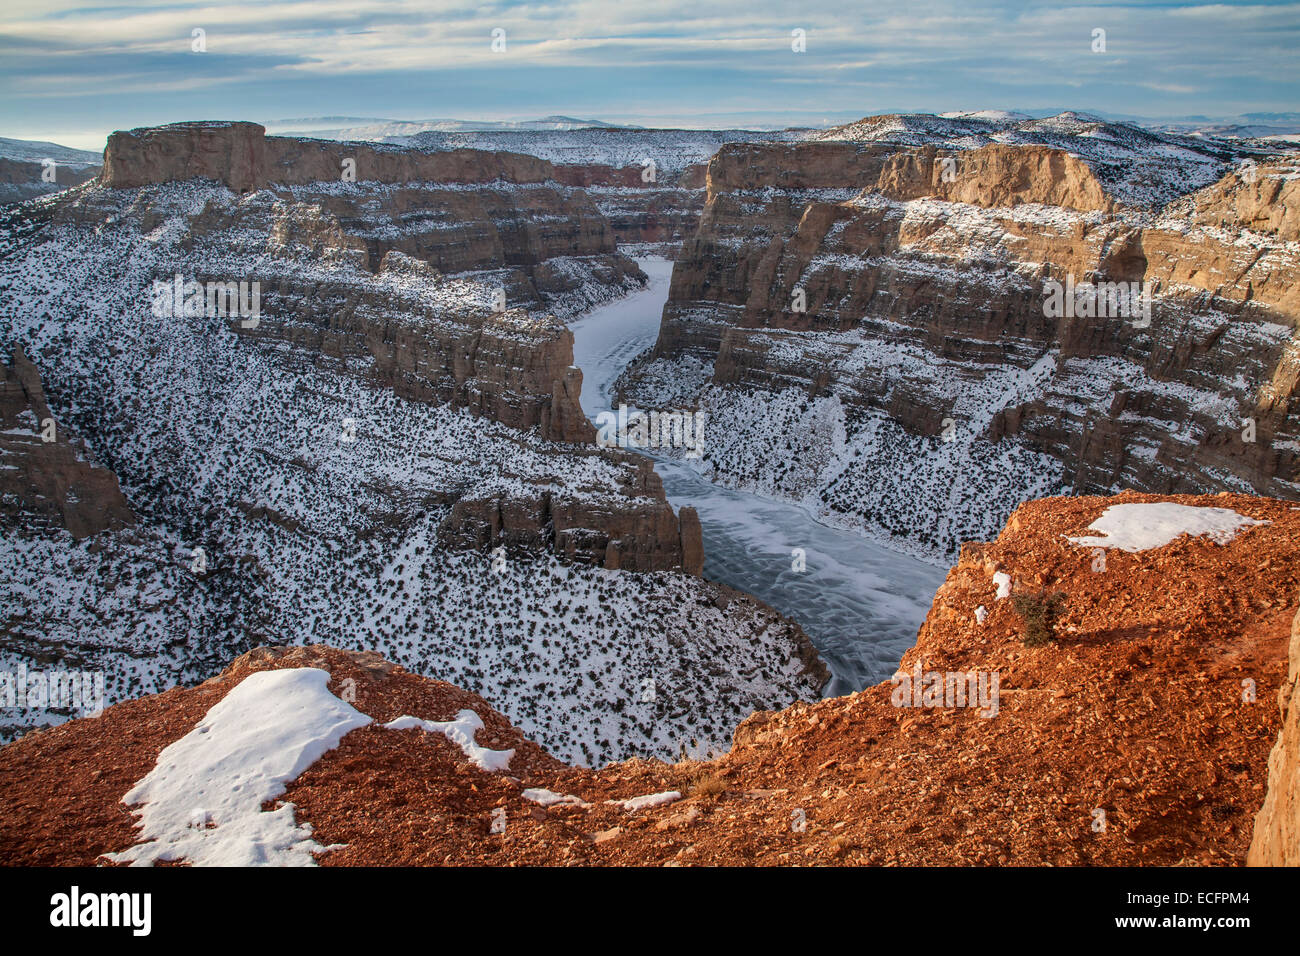 Devils canyon overlook nella Bighorn Canyon National Recreation Area Foto Stock